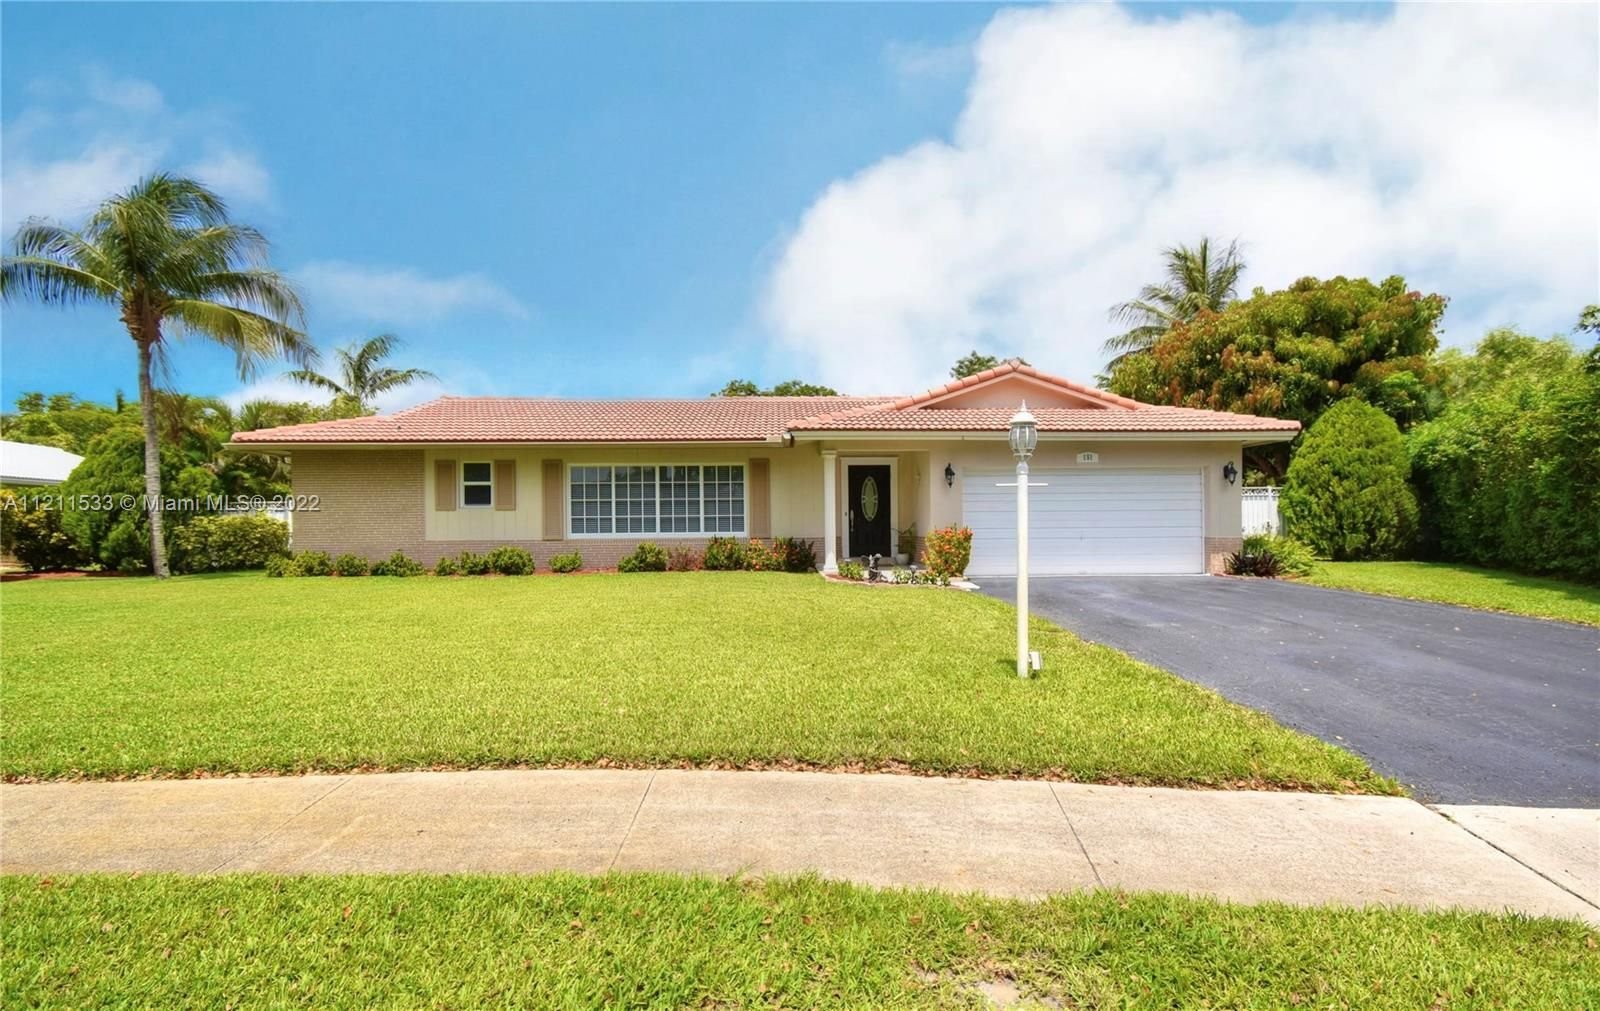 Real estate property located at 851 58th Ave, Broward County, Plantation, FL